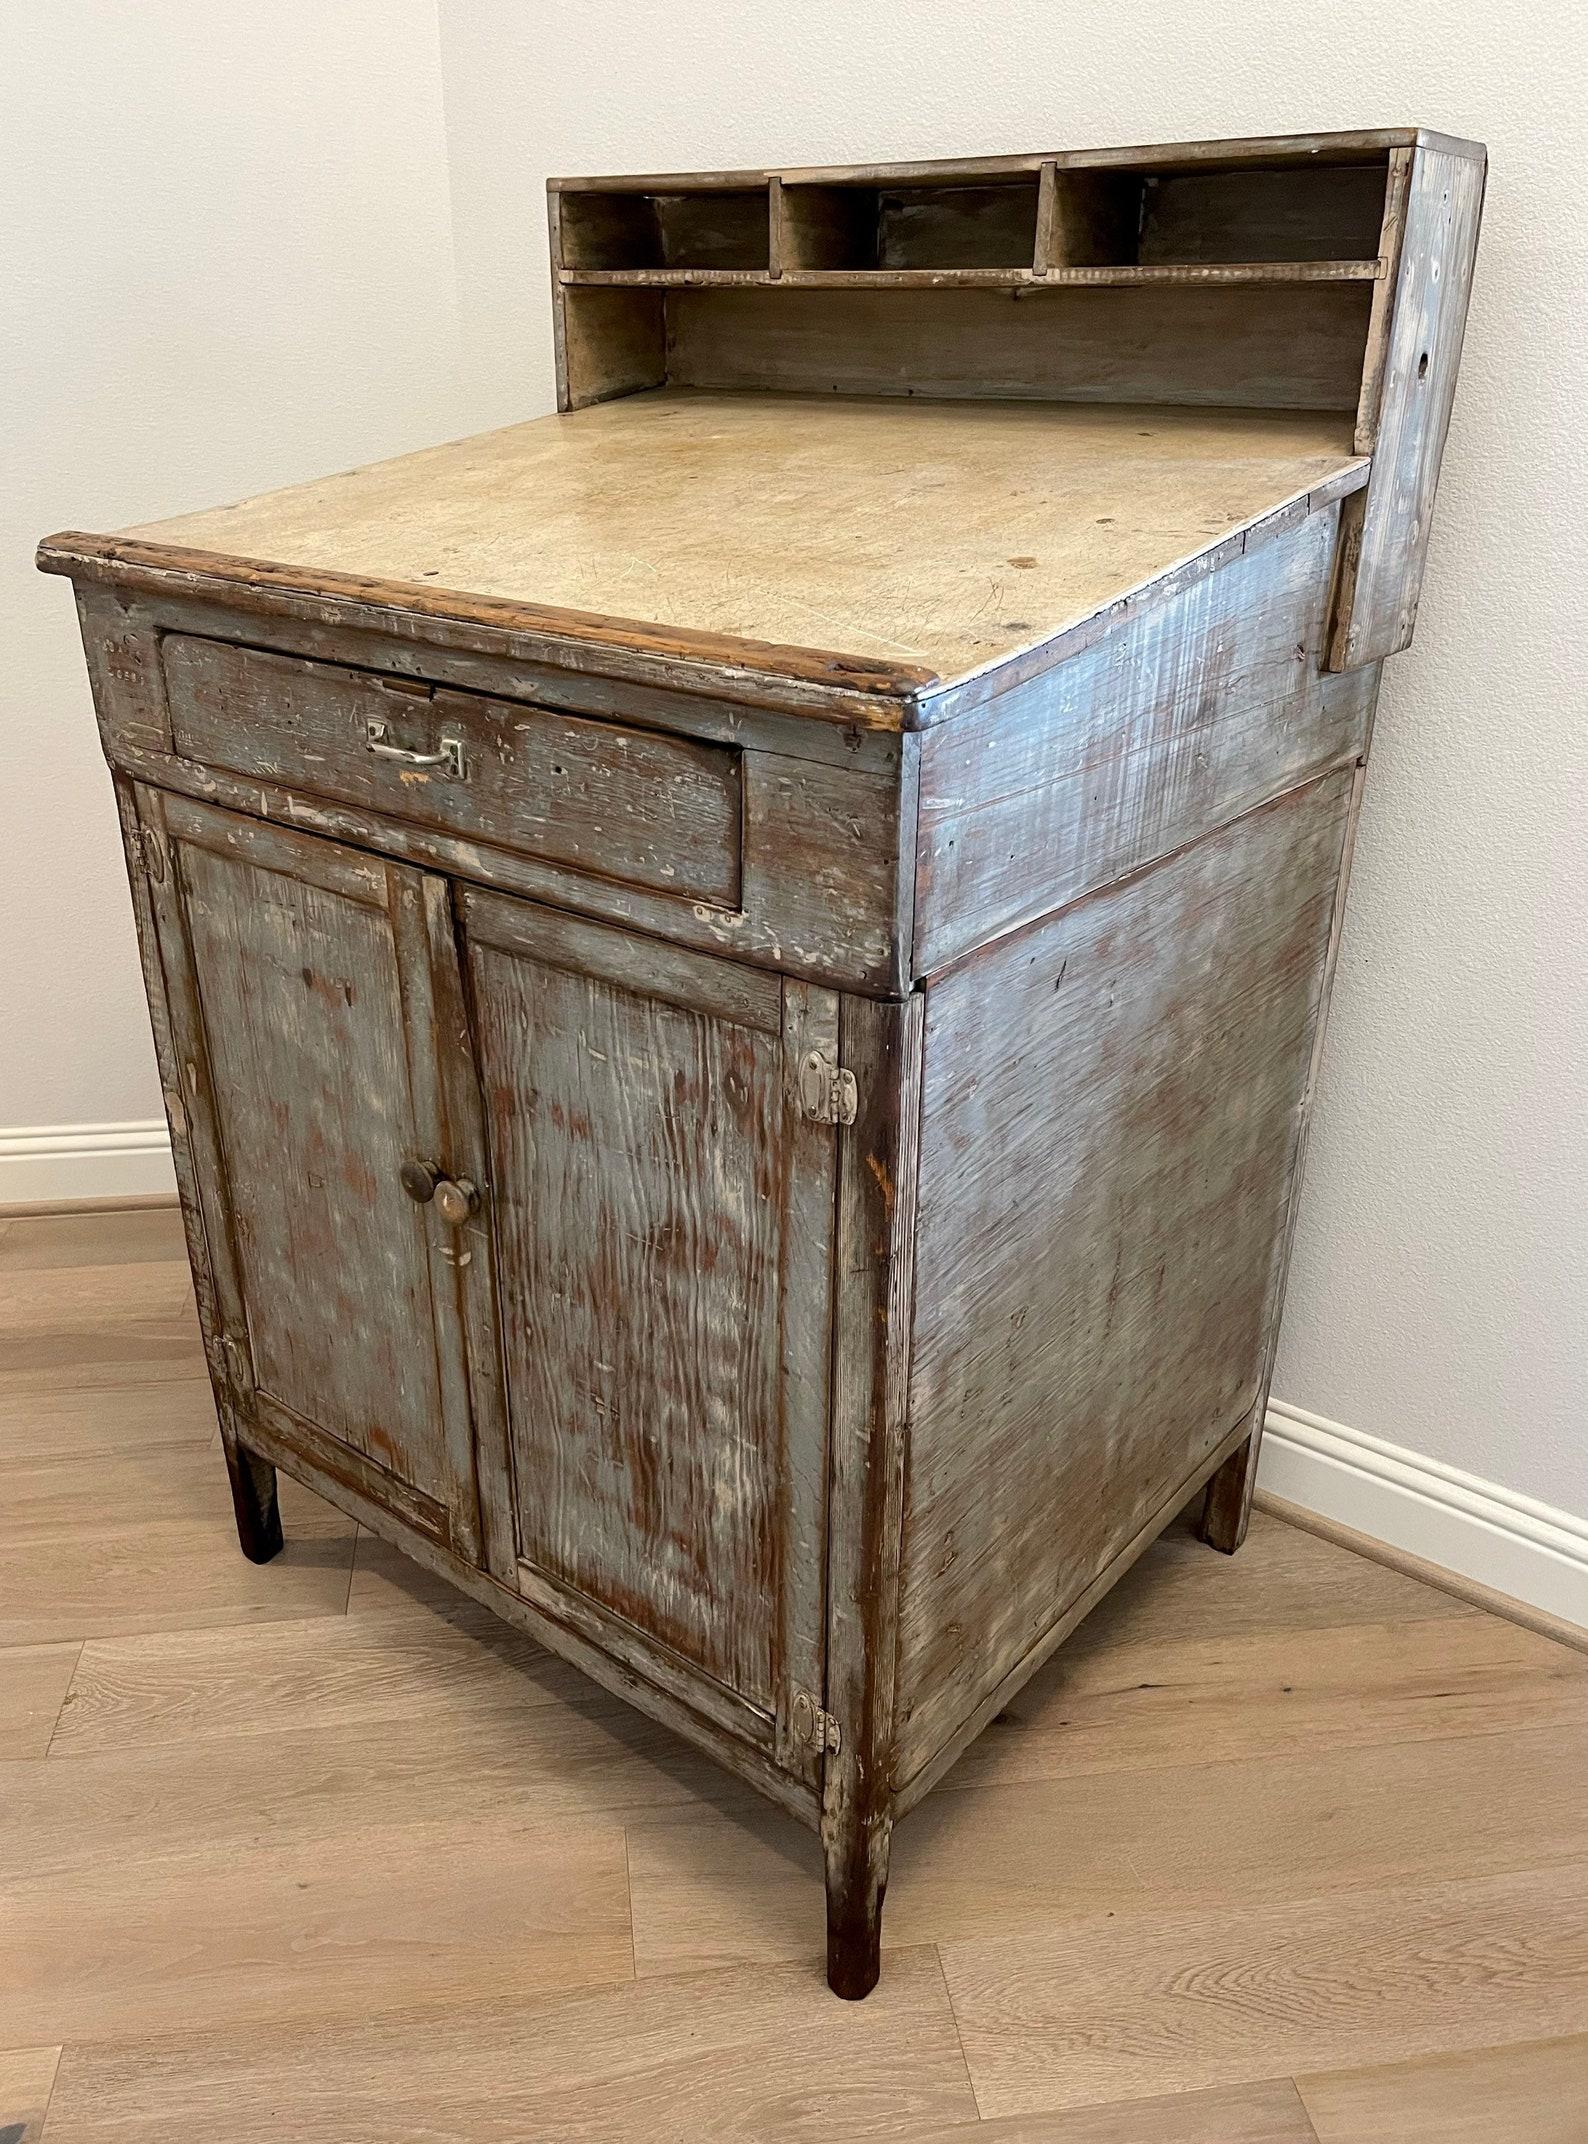 An antique American rustic industrial workbench desk. Stamped: USA, AF(eligible) 1059.9. Possibly USA Armed Forces or Air Force. 

Hand-crafted in the early/mid-20th century, likely originating in the Southern United States, unusual utilitarian